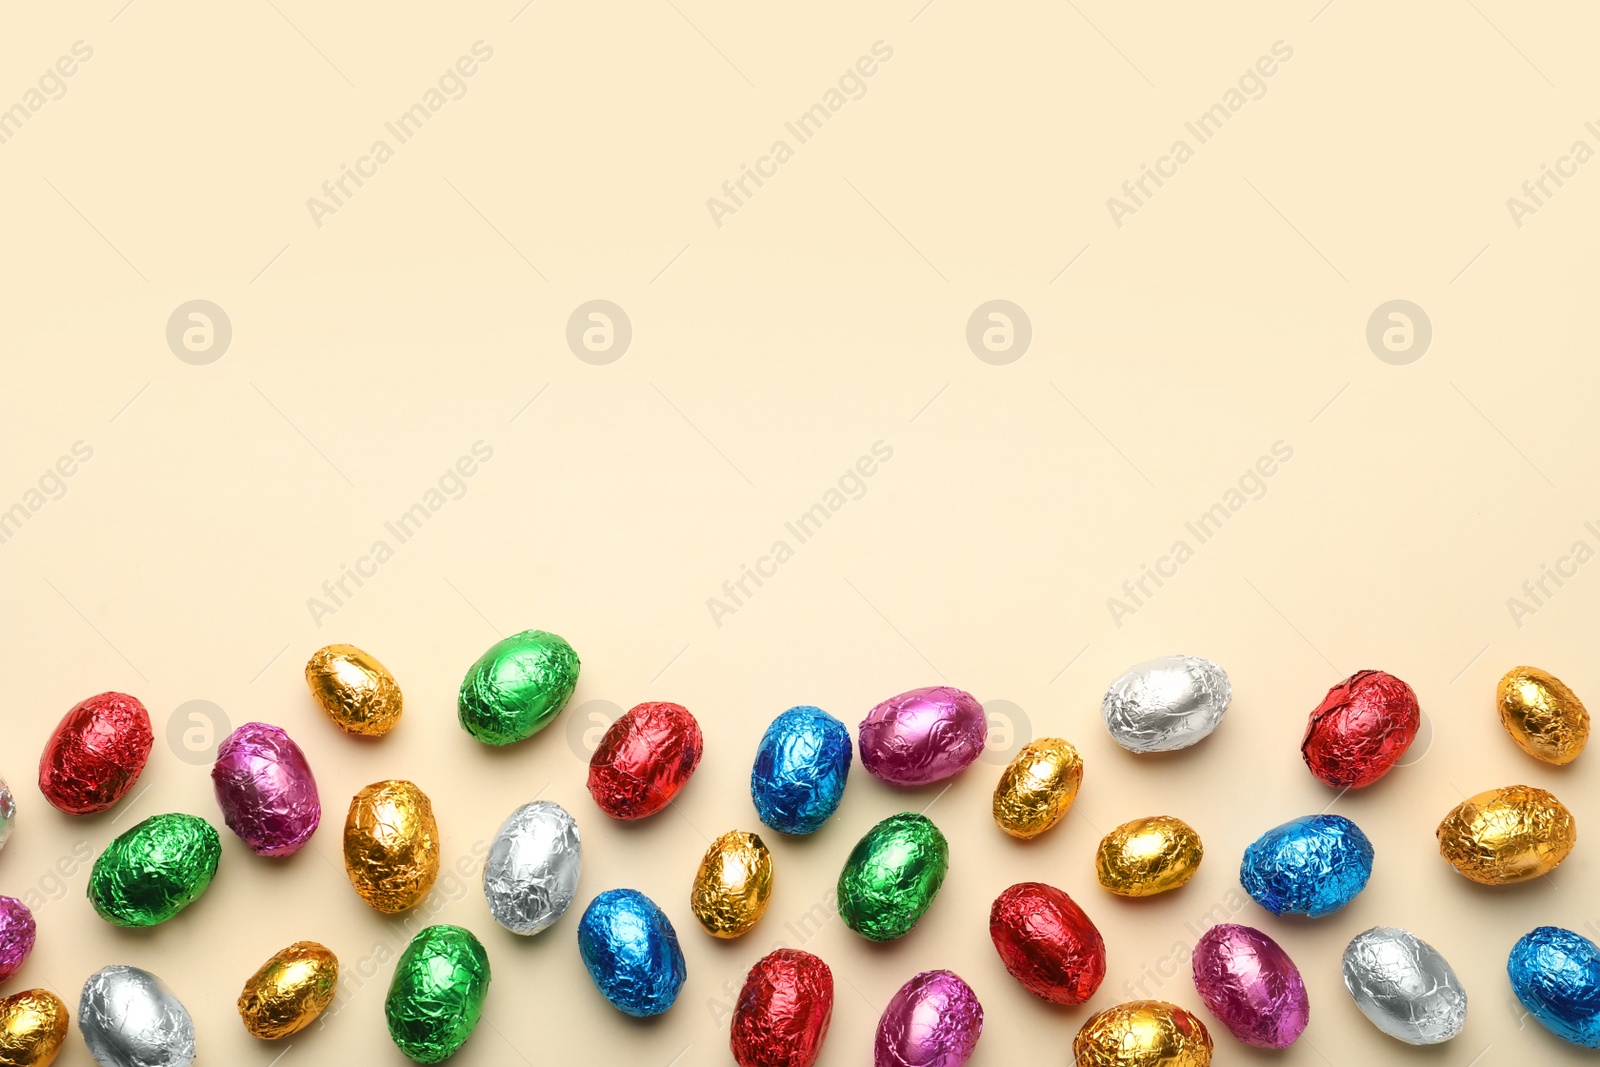 Photo of Chocolate eggs wrapped in colorful foil on beige background, flat lay. Space for text